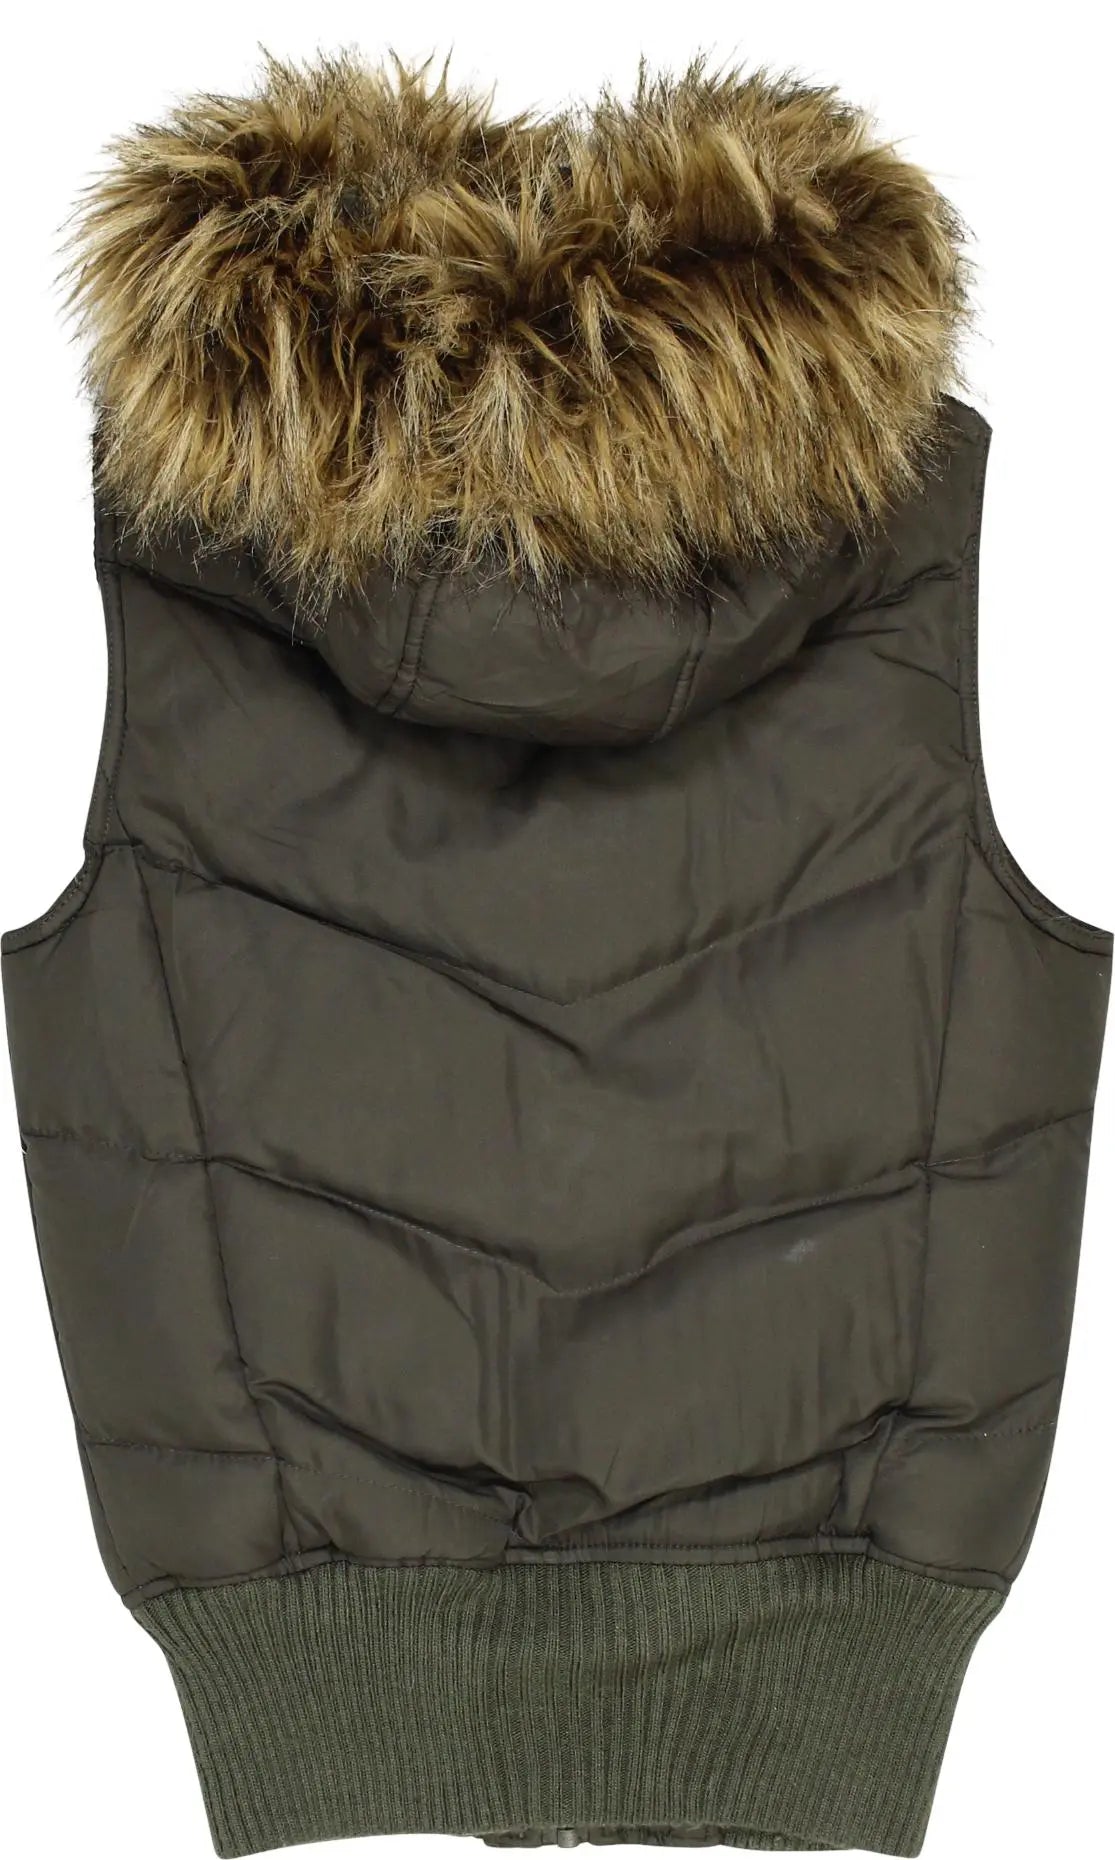 C&A - Green Body Warmer with Faux Fur Hood- ThriftTale.com - Vintage and second handclothing